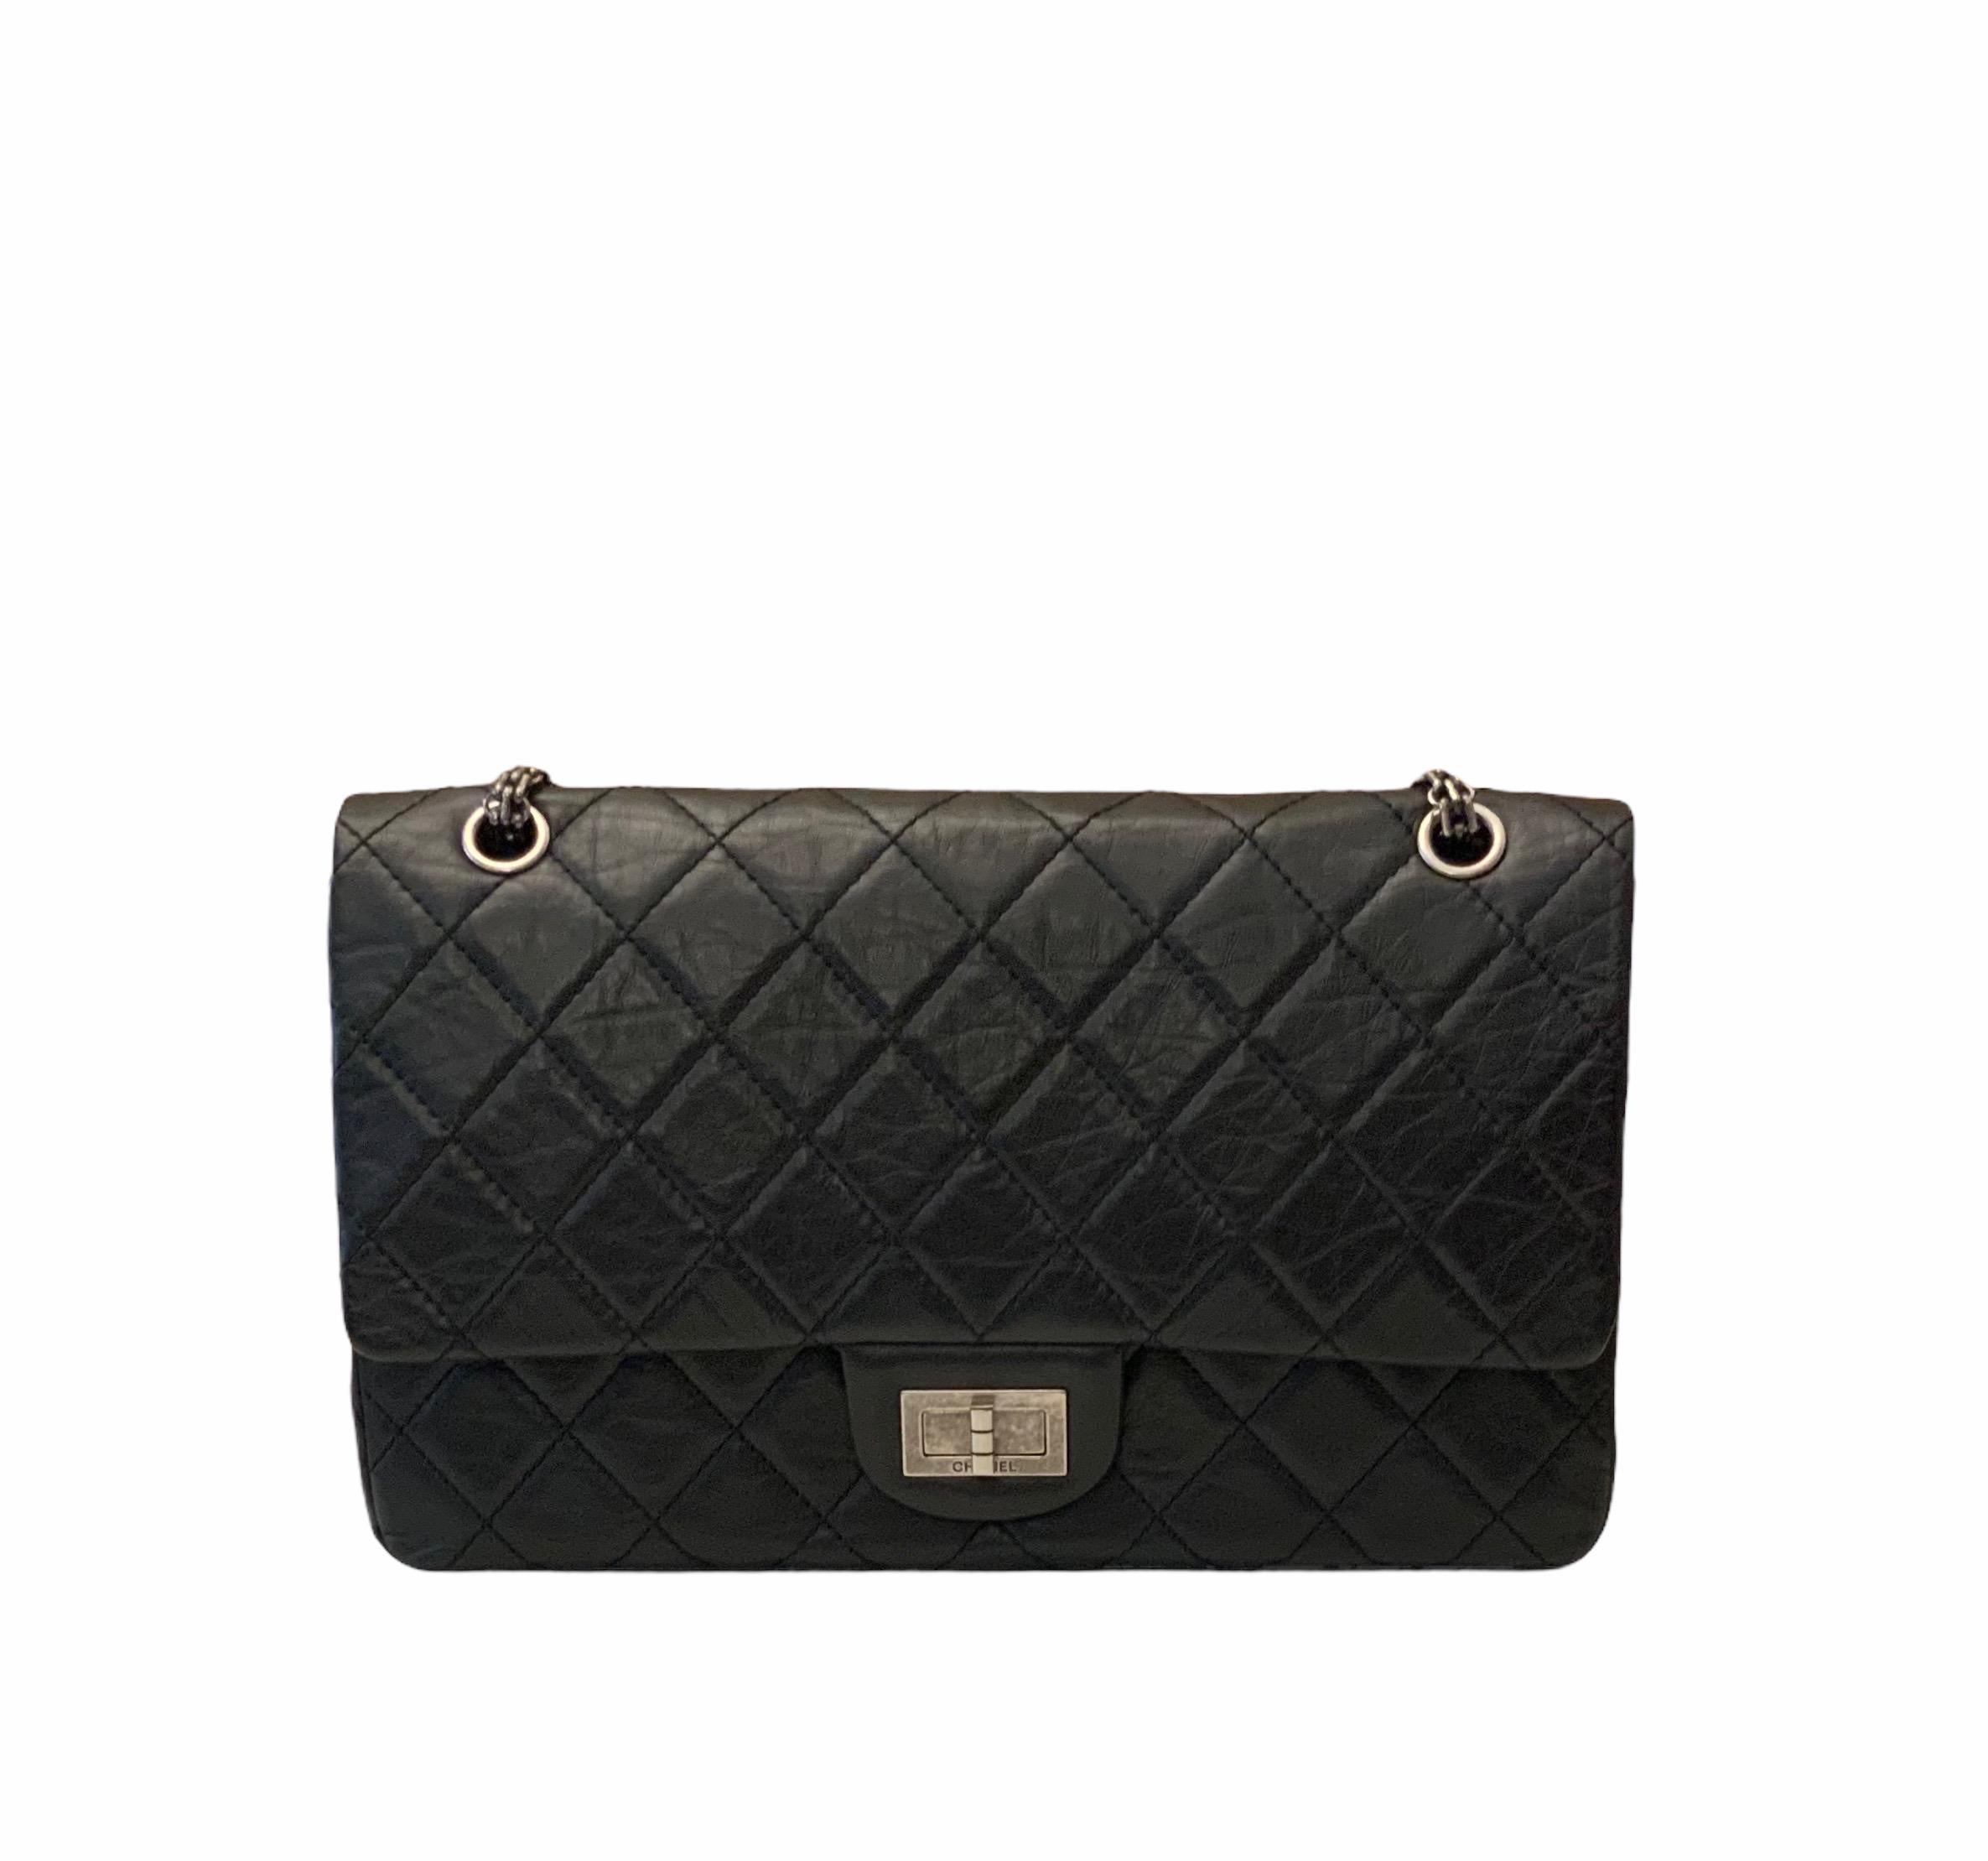 A 2.55 Reissue is a 2005 version of the 2.55 that Karl Lagerfeld reintroduced as an exact recreation of the original and this is why it is made in France.
This gorgeous pre-owned Chanel black 2.55 Classic 227 Flap Bag - 5 pockets is the most iconic